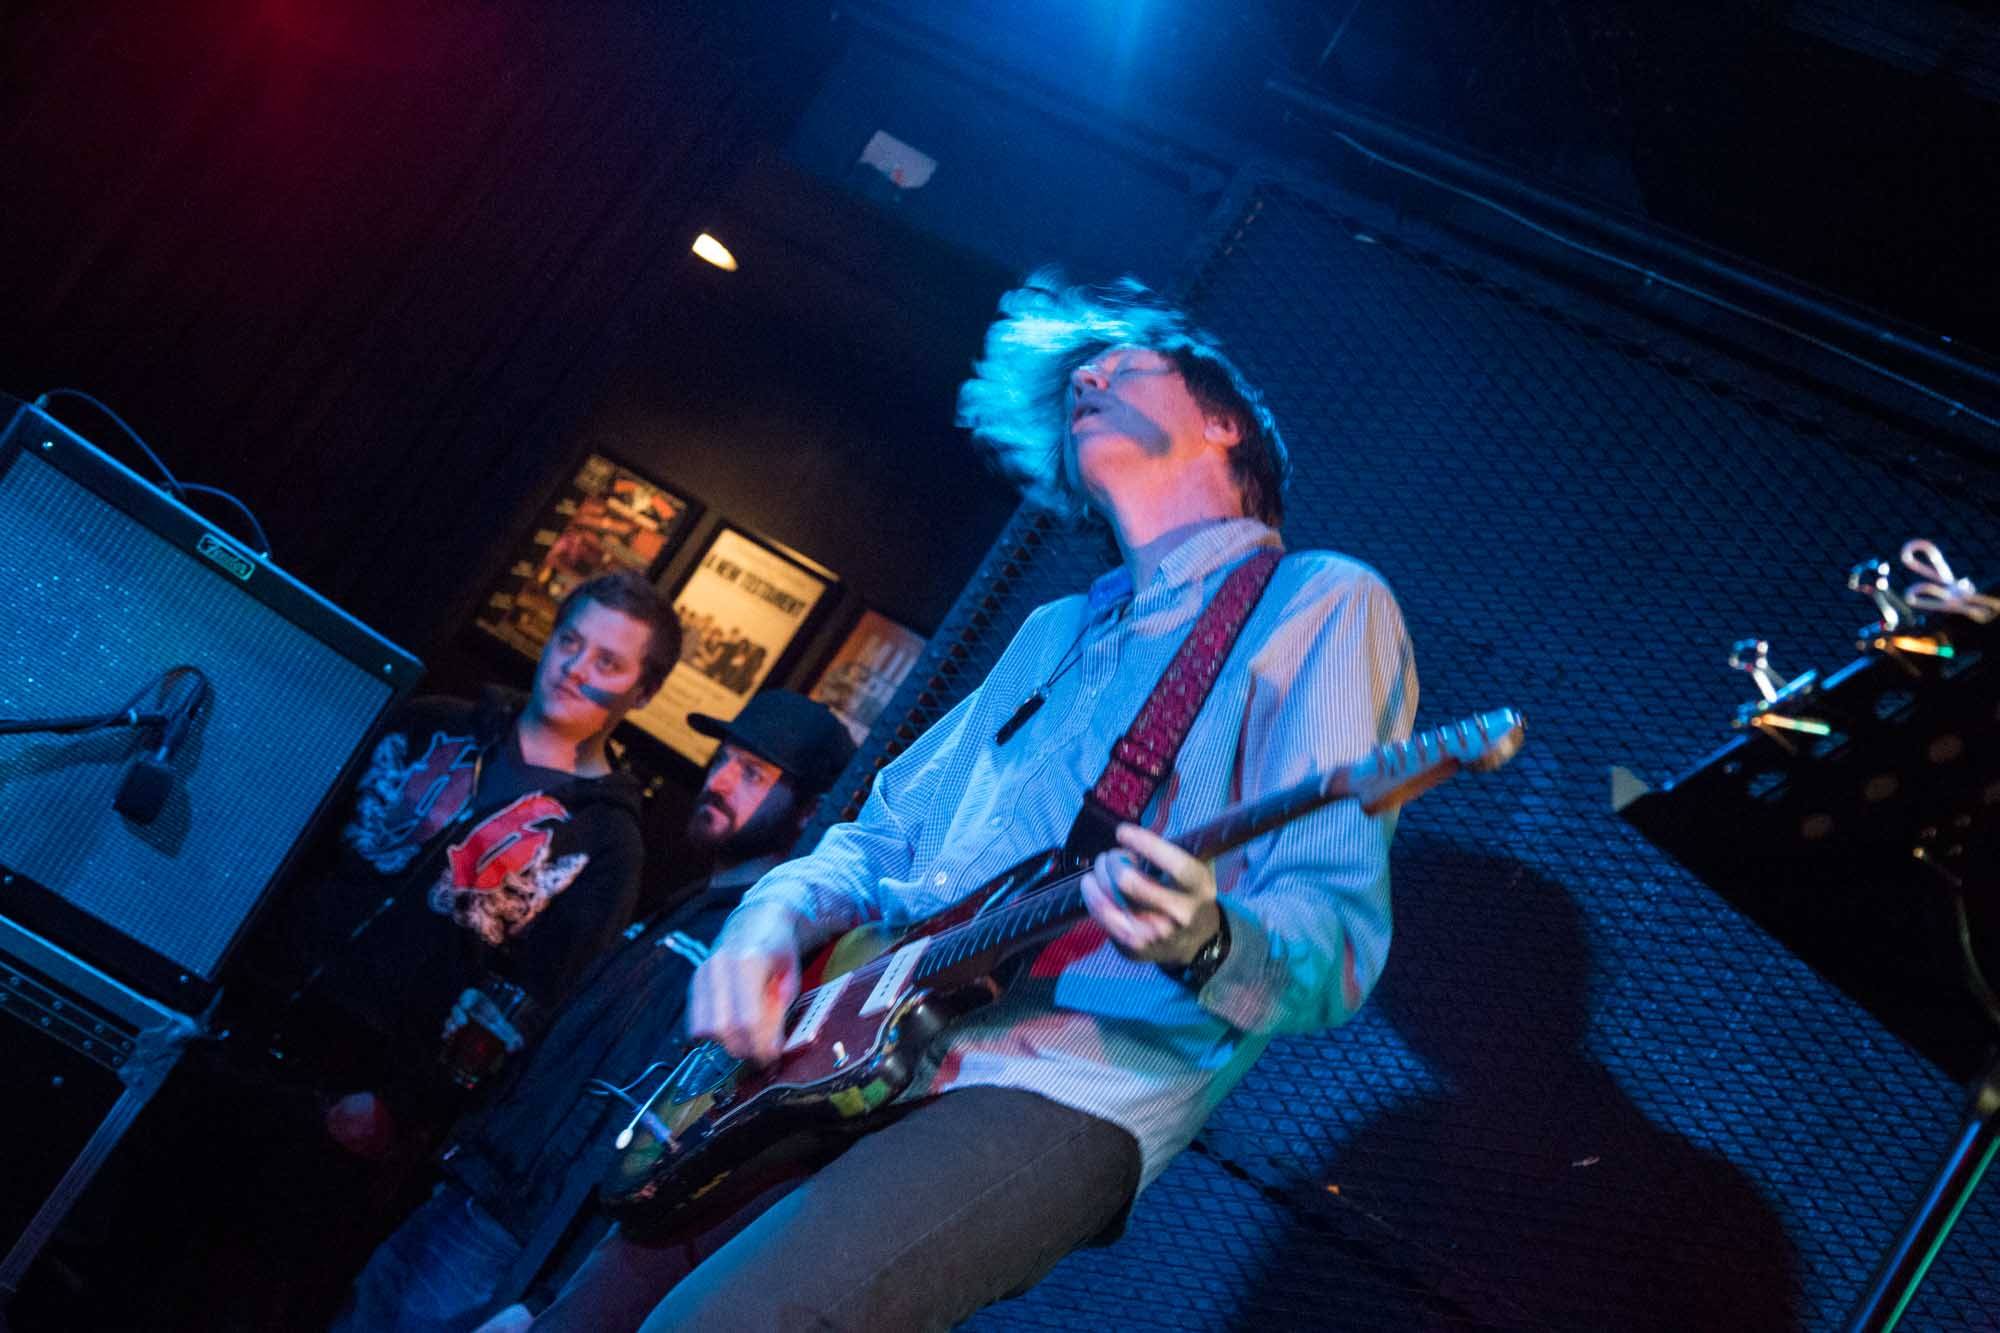 Thurston Moore at the Biltmore Cabaret, Vancouver, Oct. 3 2014. Kirk Chantraine photo.